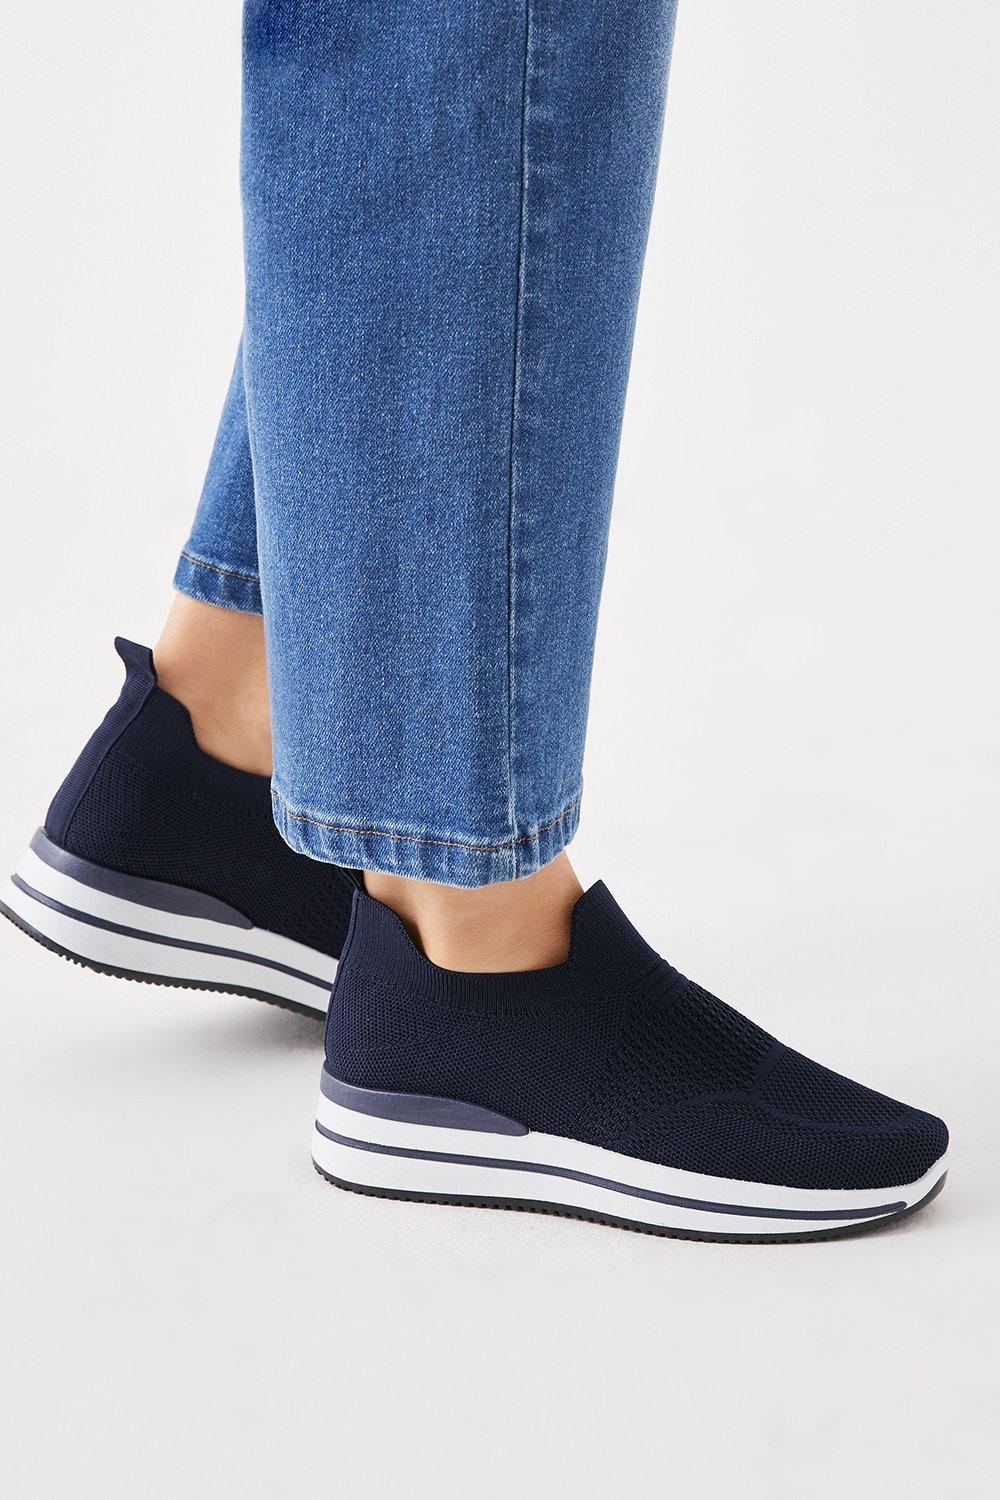 Women’s Good For The Sole: Naomi Wide Fit Comfort Trainers - navy - 3